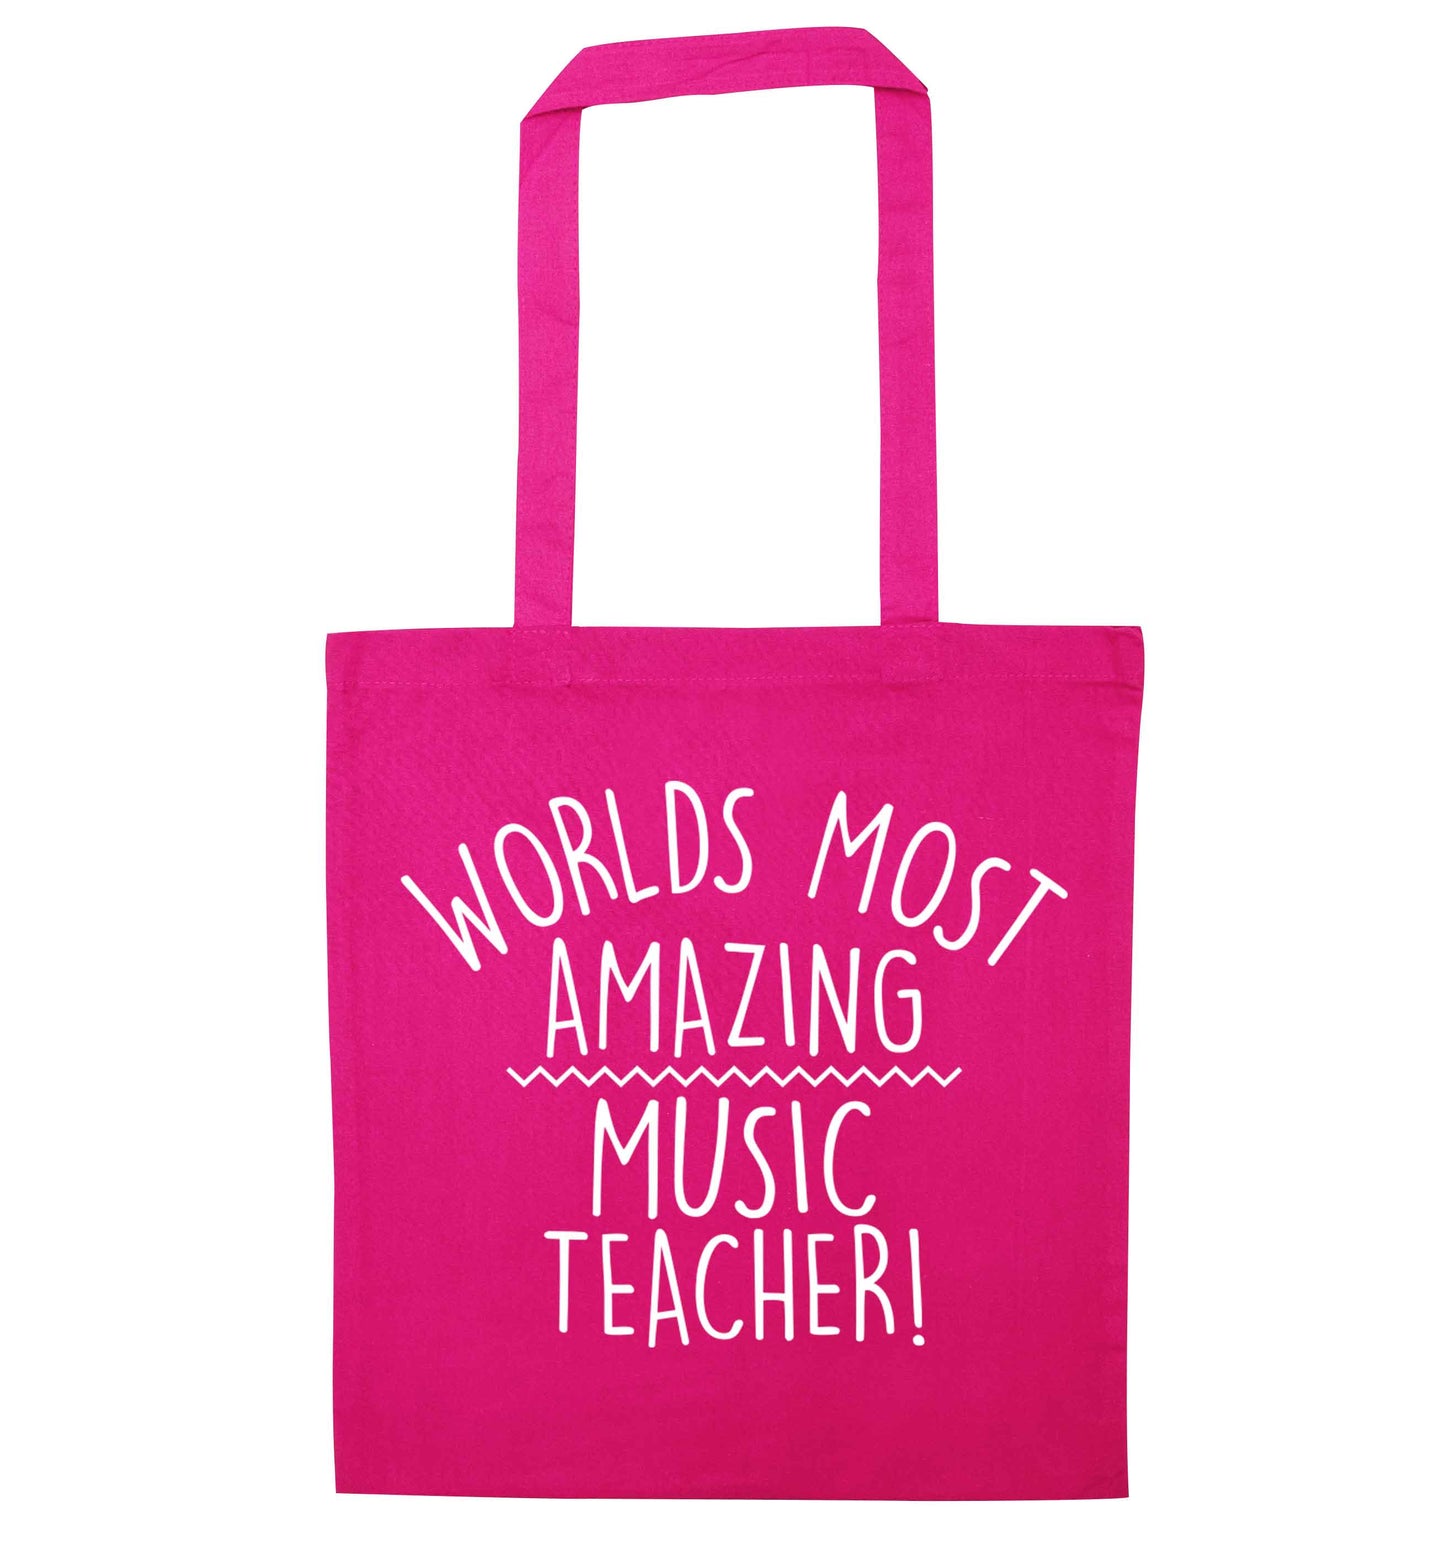 Worlds most amazing music teacher pink tote bag